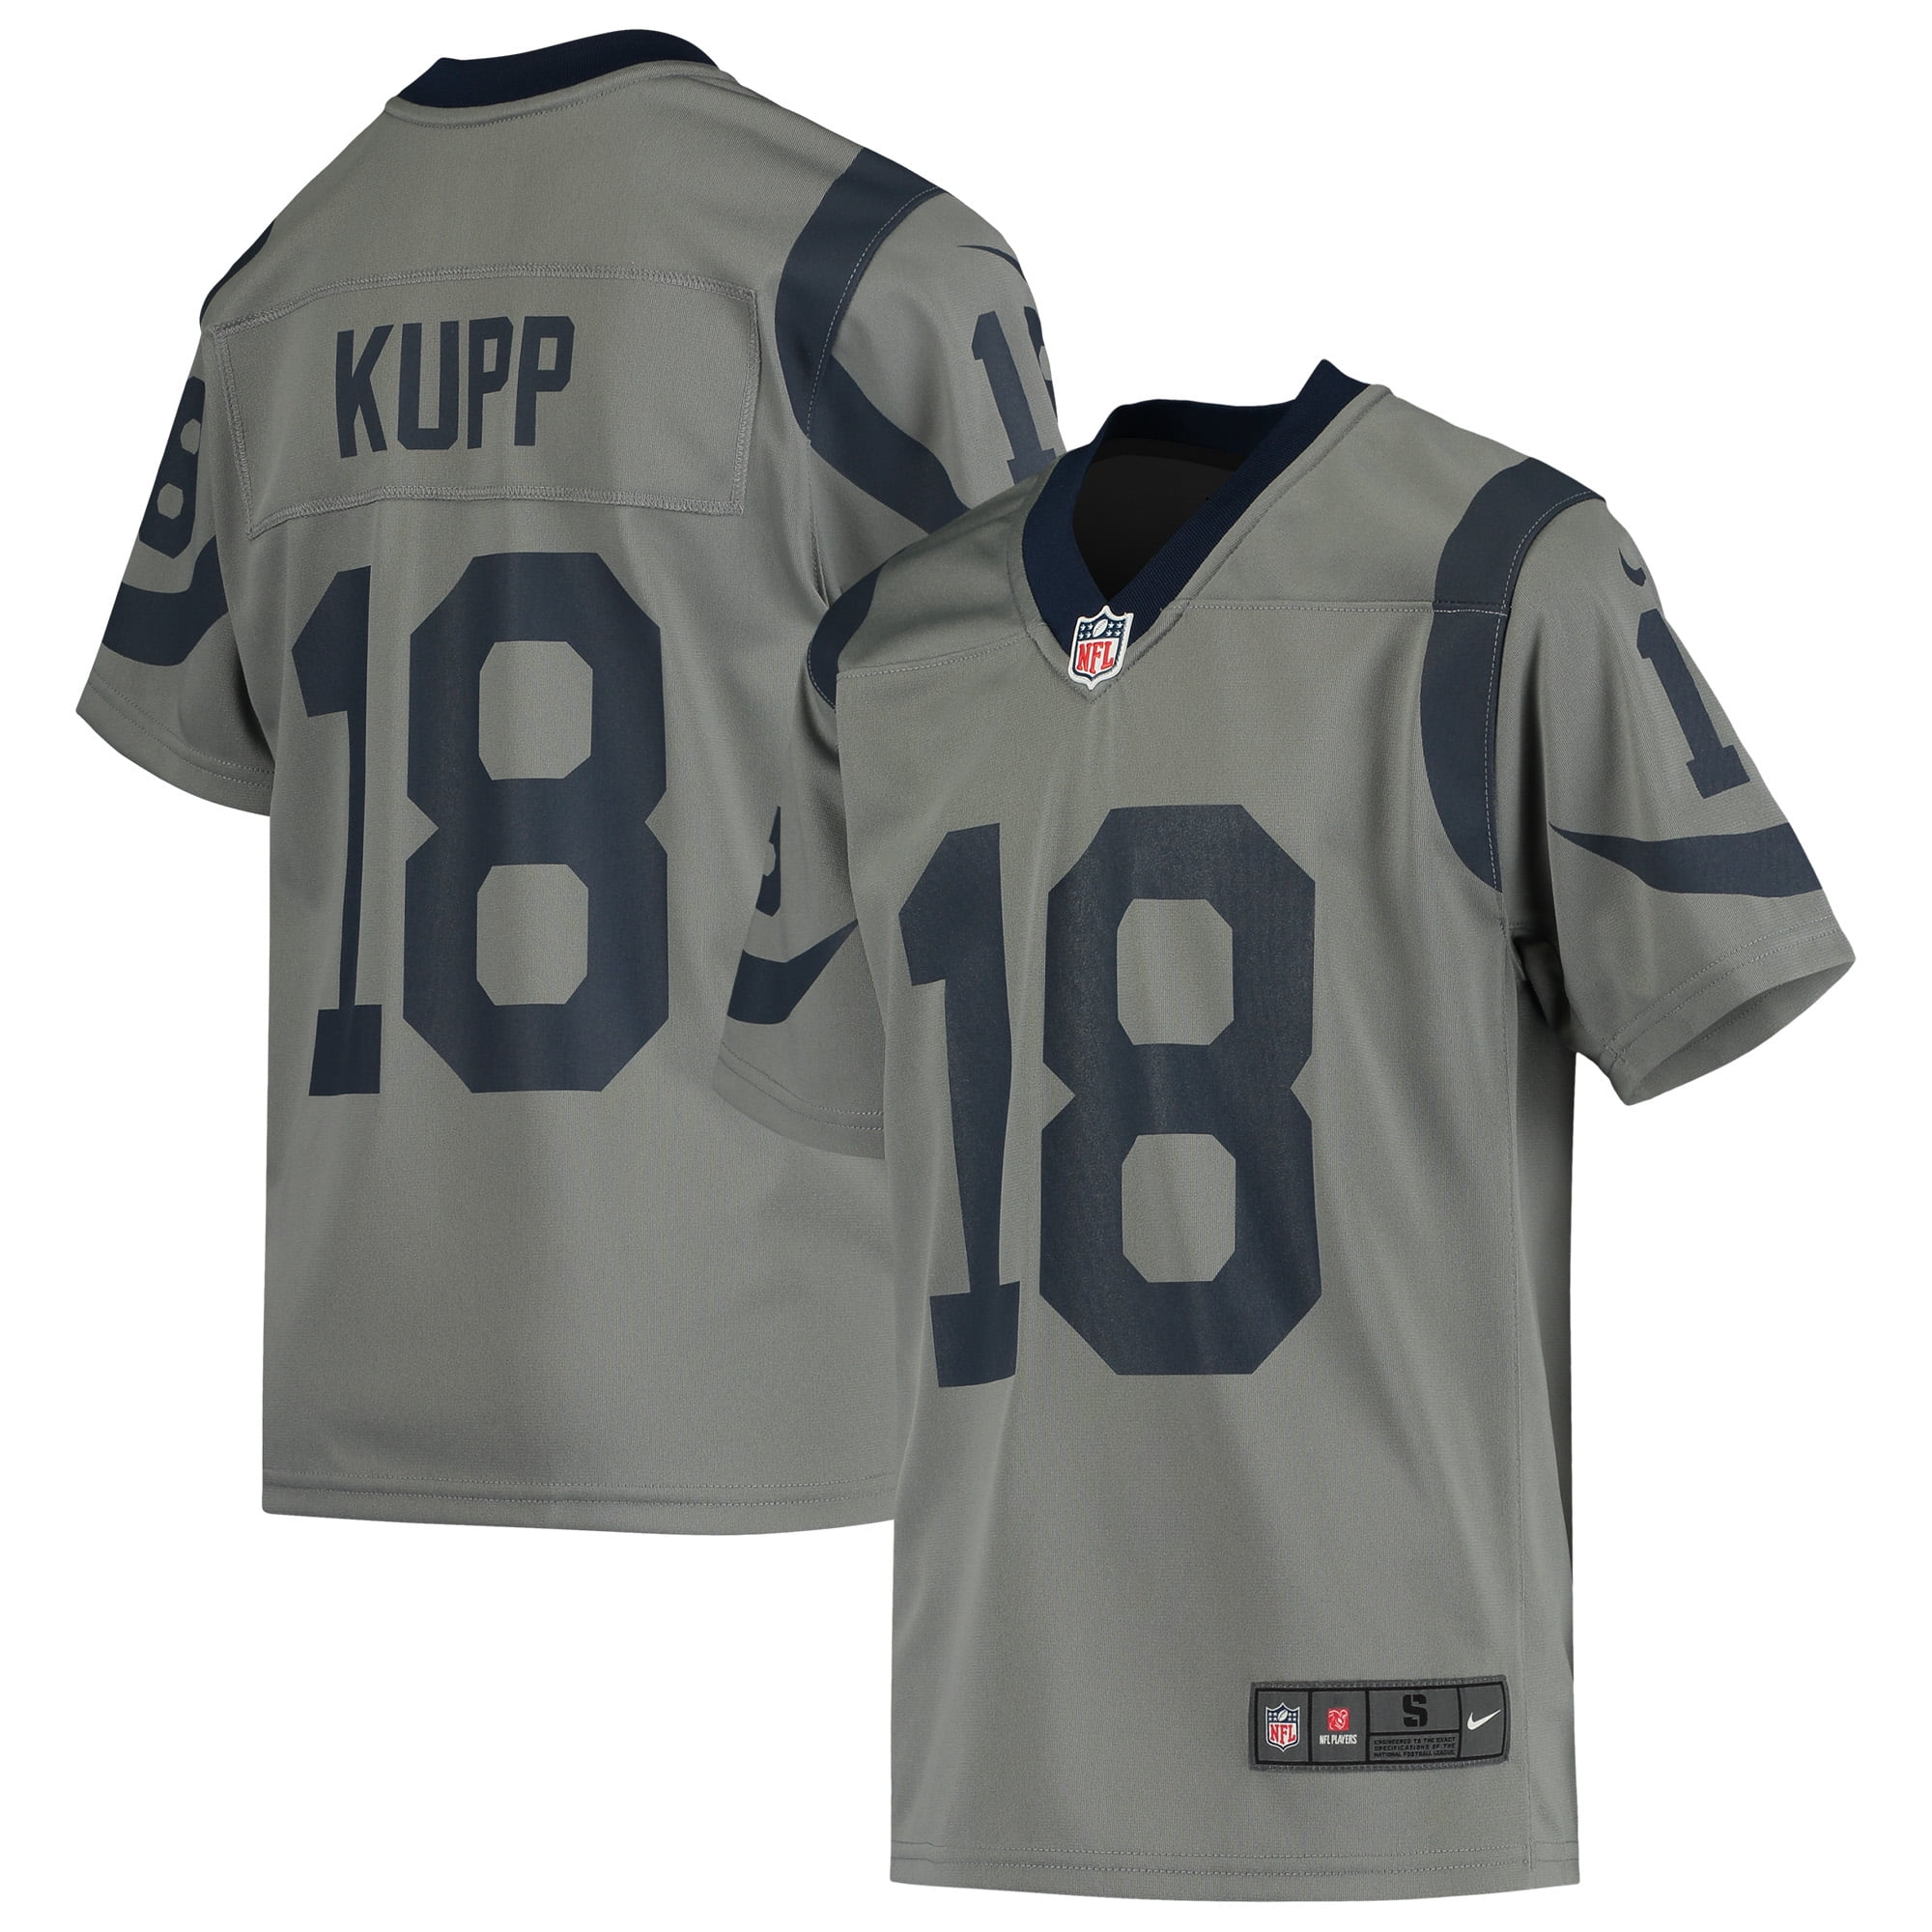 cooper kupp youth jersey